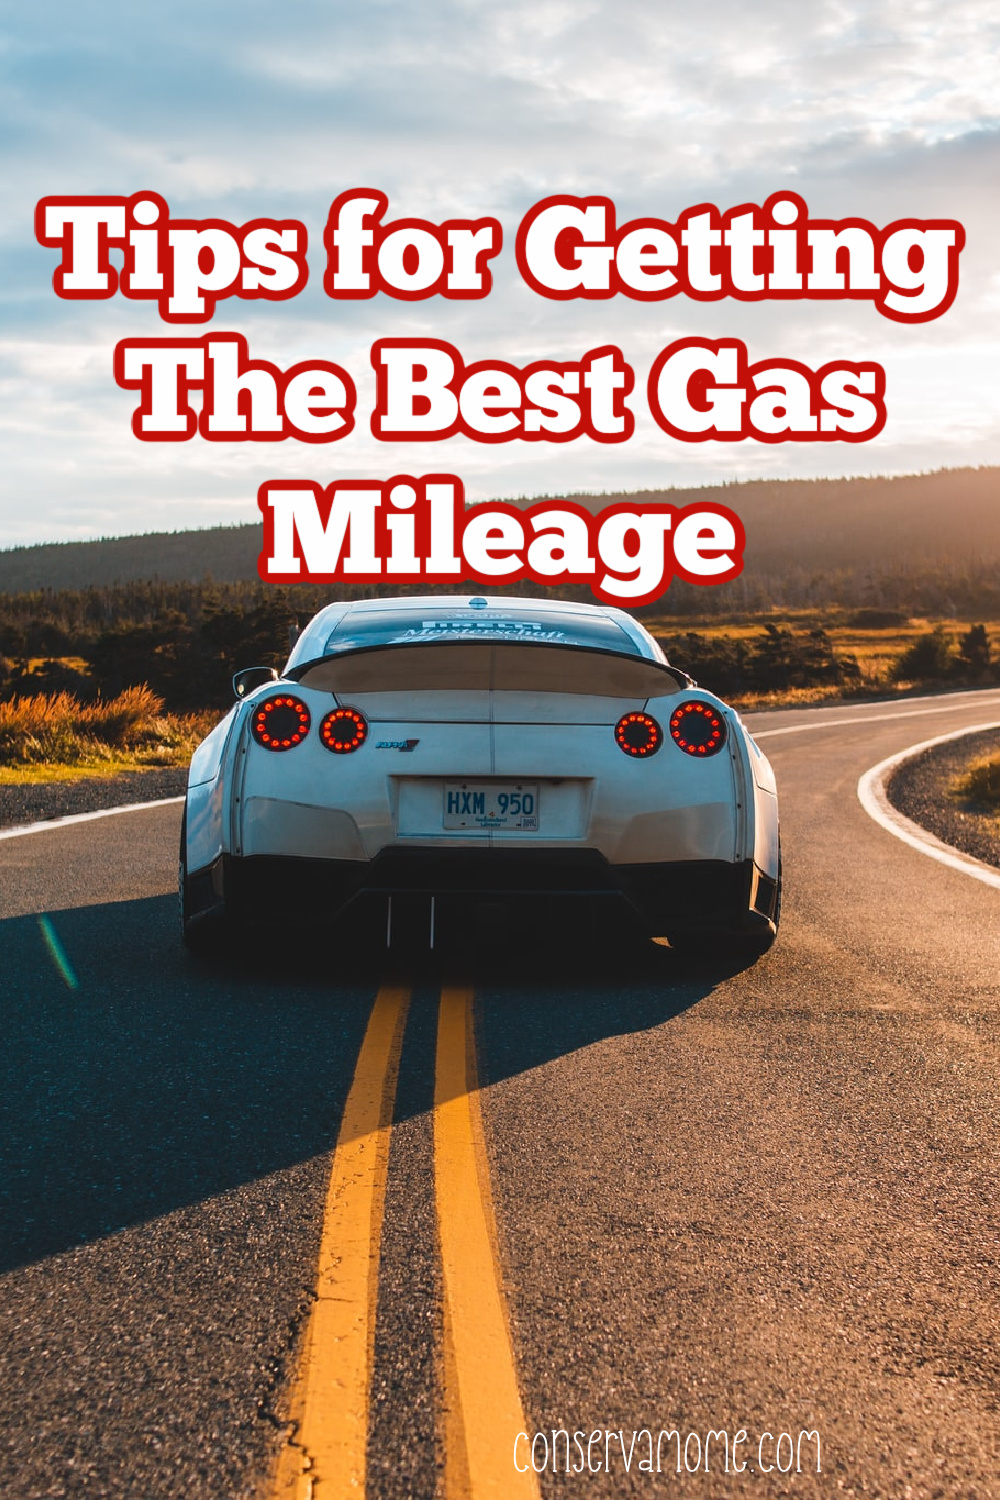 Tips for Getting The Best Gas Mileage